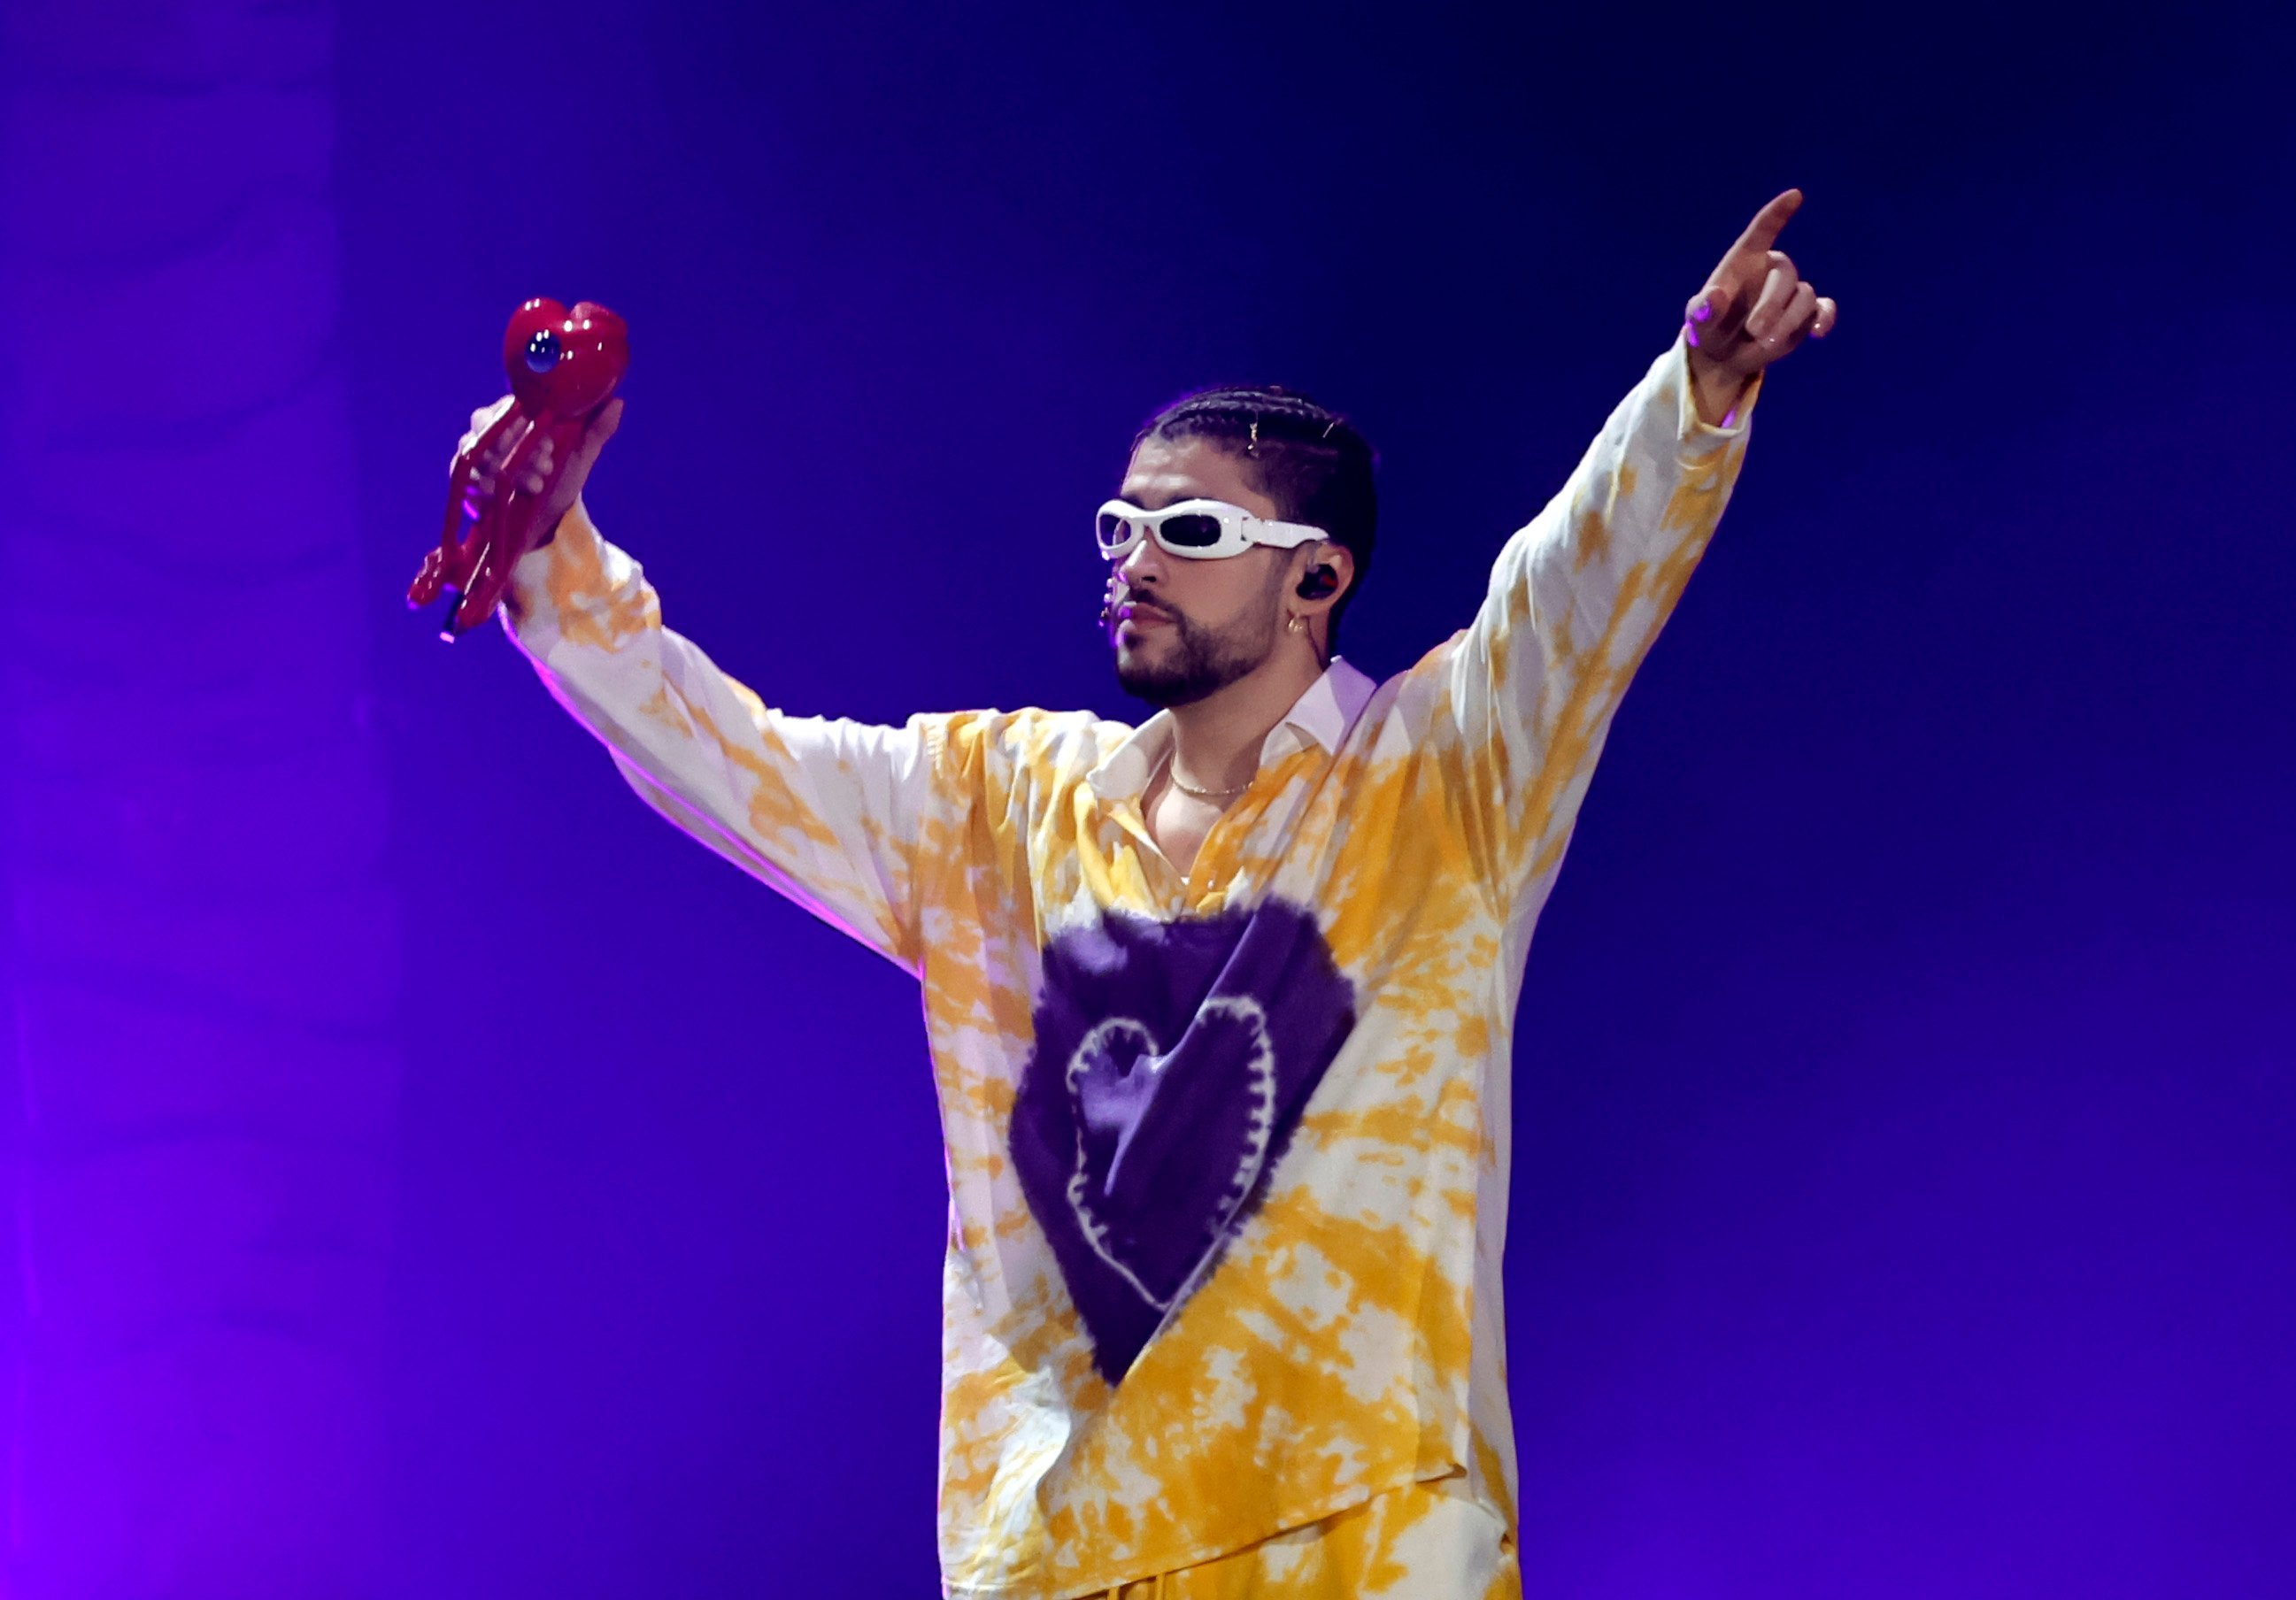 Bad Bunny performs during his World's Hottest Tour at SoFi Stadium